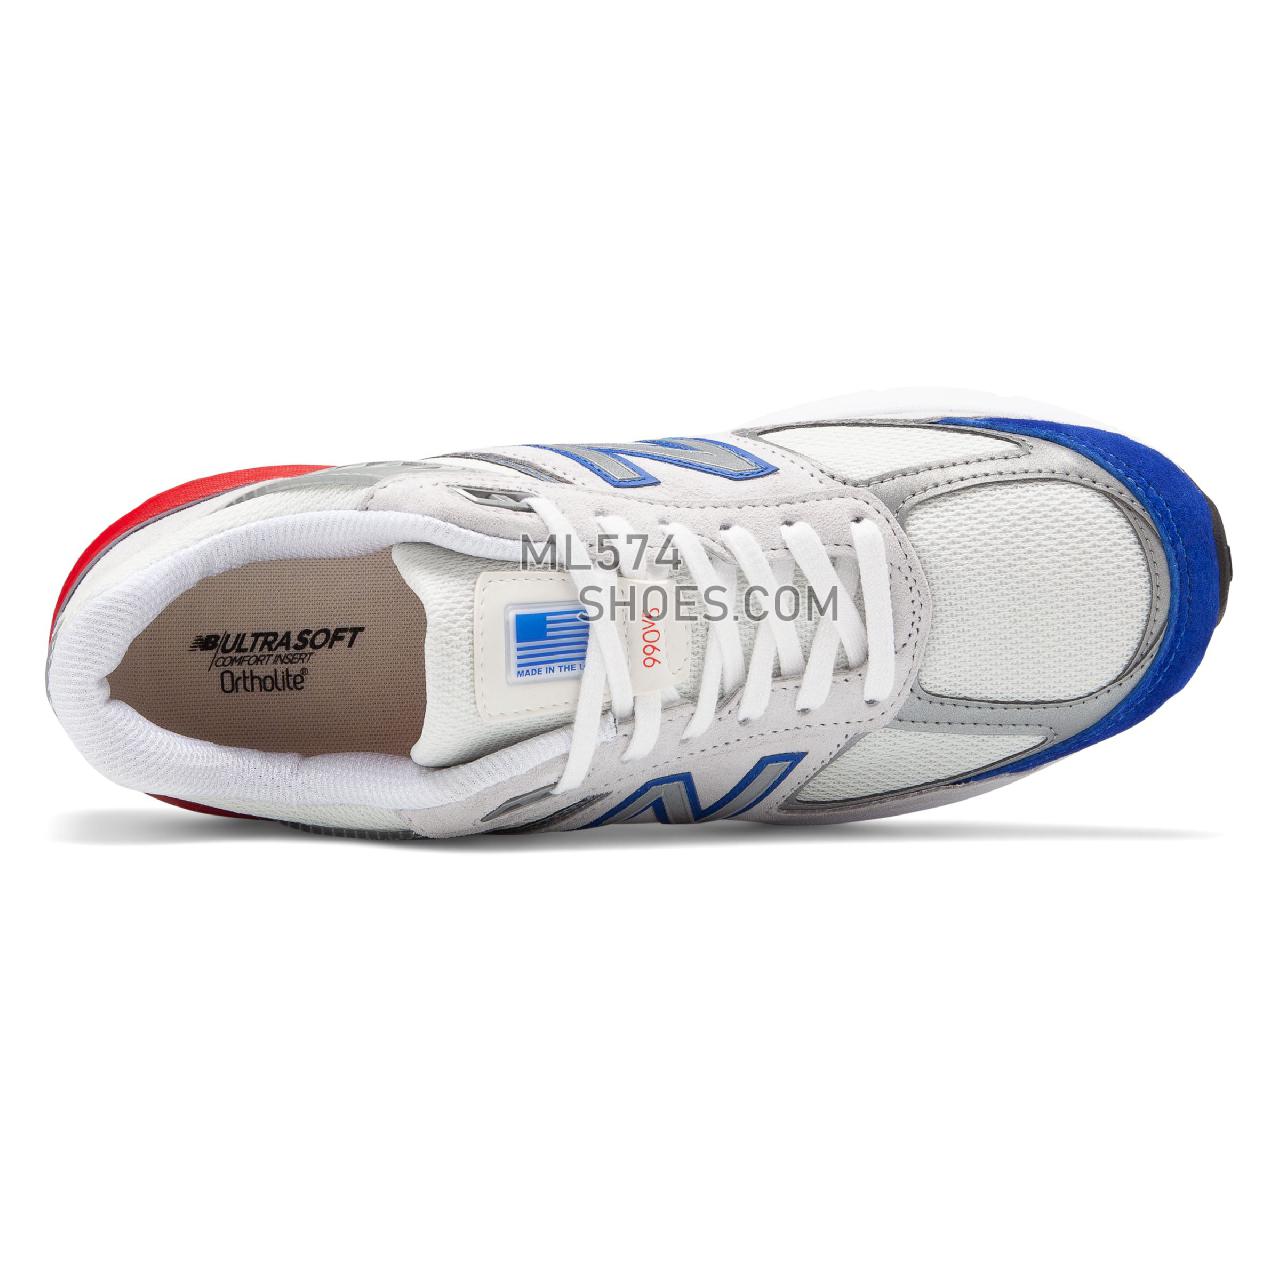 New Balance 990v5 Made in US - Men's Neutral Running - Nimbus Cloud with Team Royal and Team Red - M990NB5